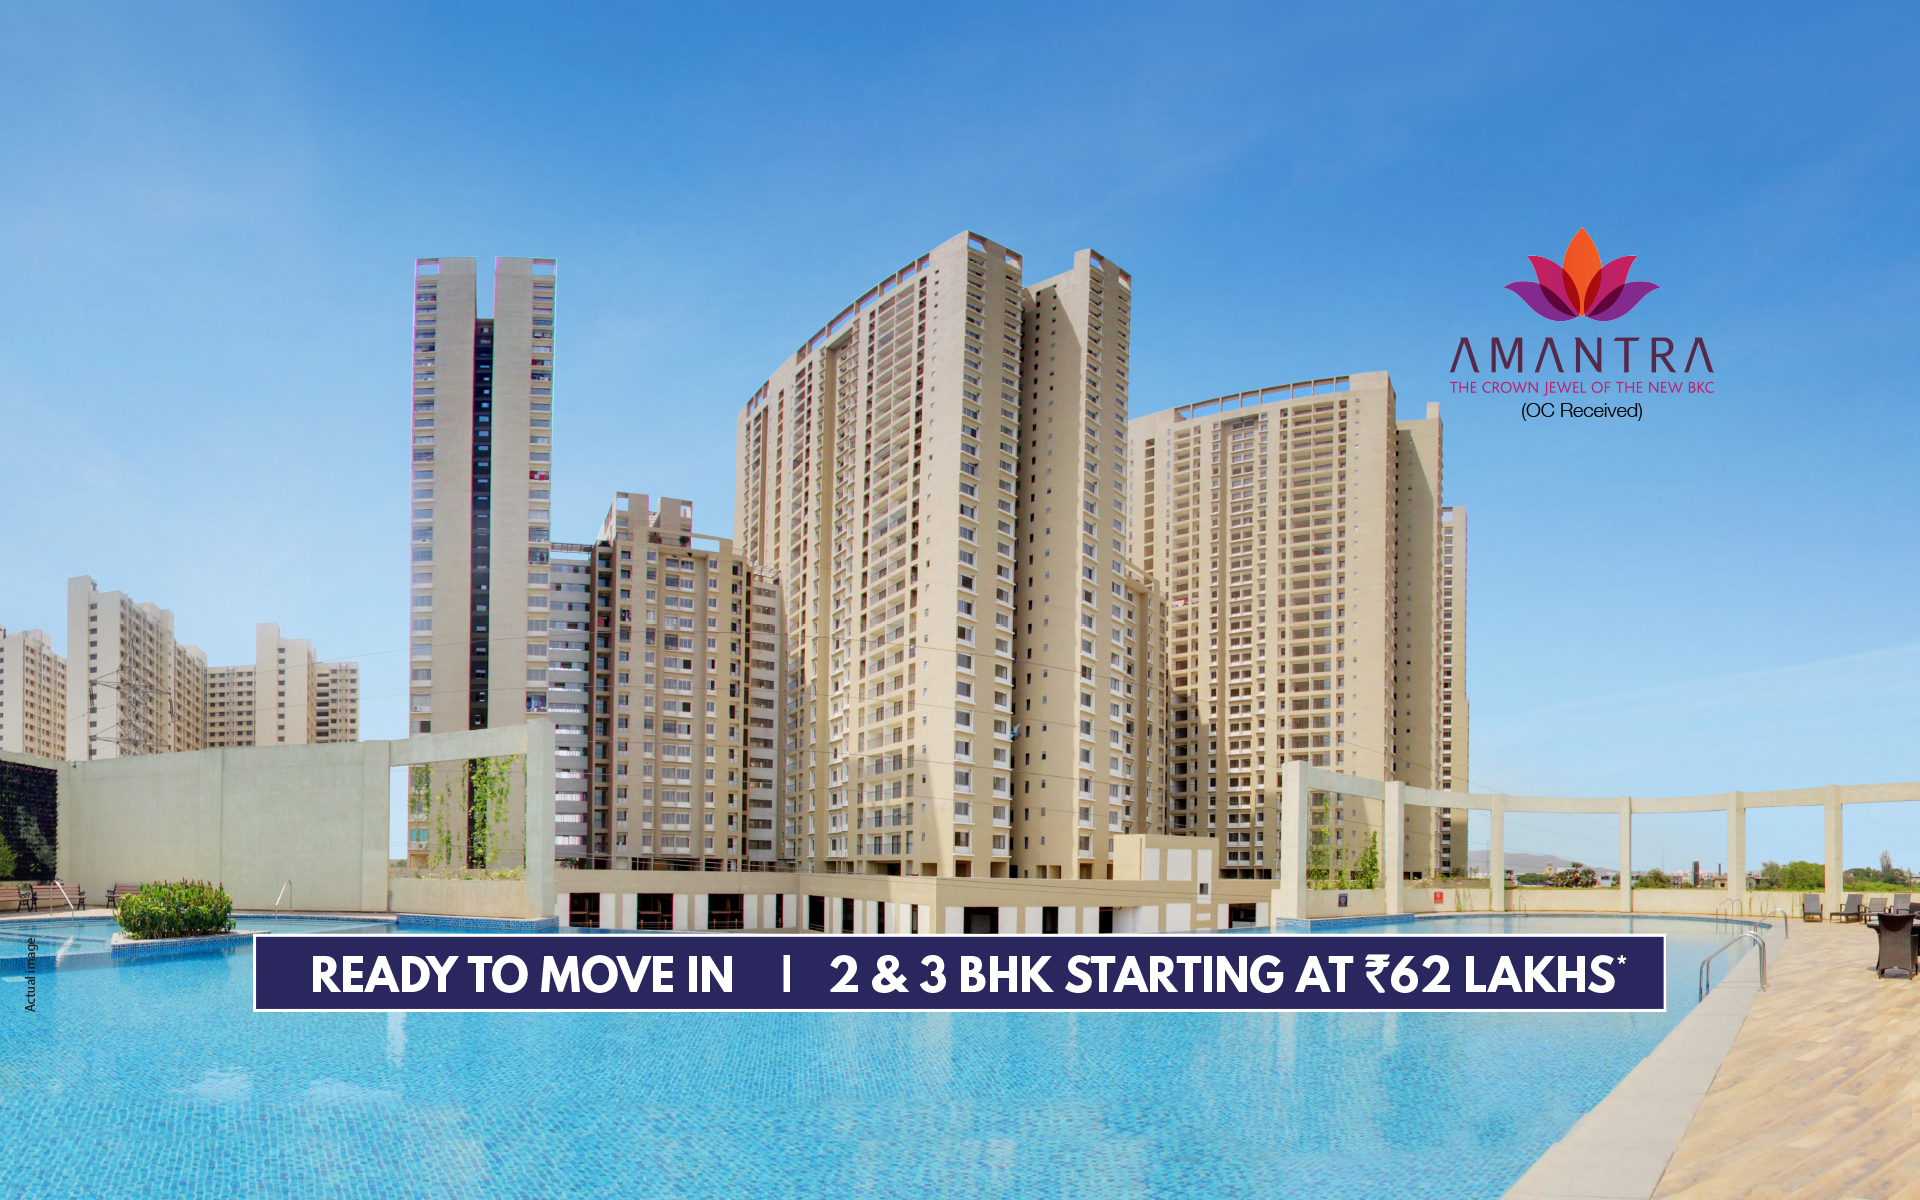 Ready to move in 2 & 3 BHK starting at Rs 62 Lakhs at Tata Amantra, Mumbai Update